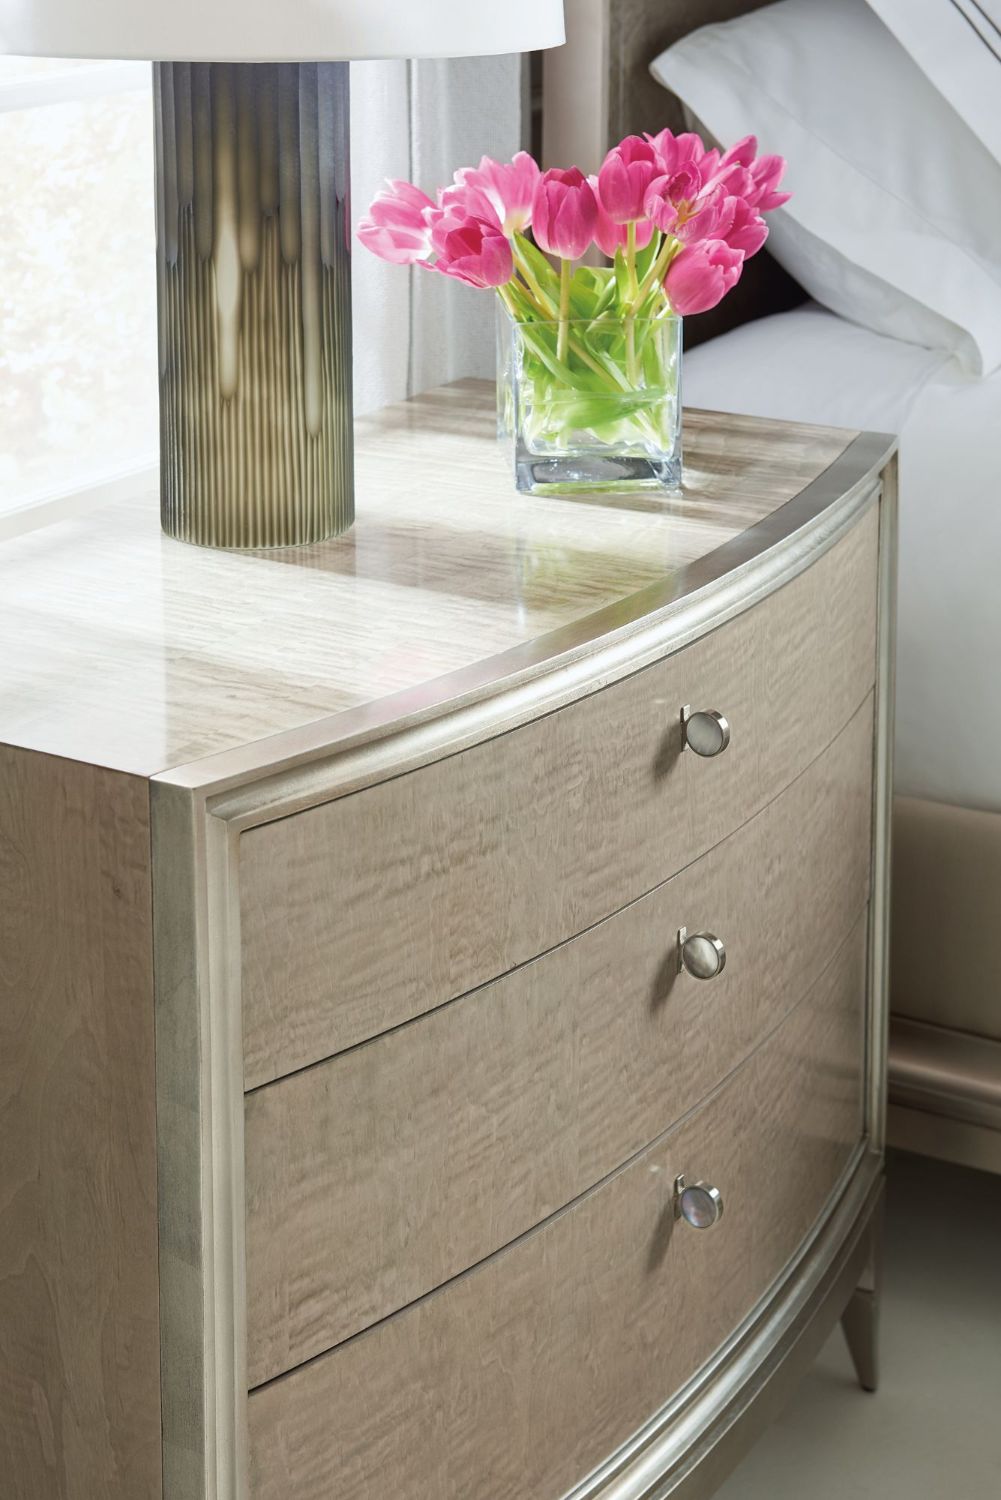 Caracole Classic Rise and Shine Bedside Table